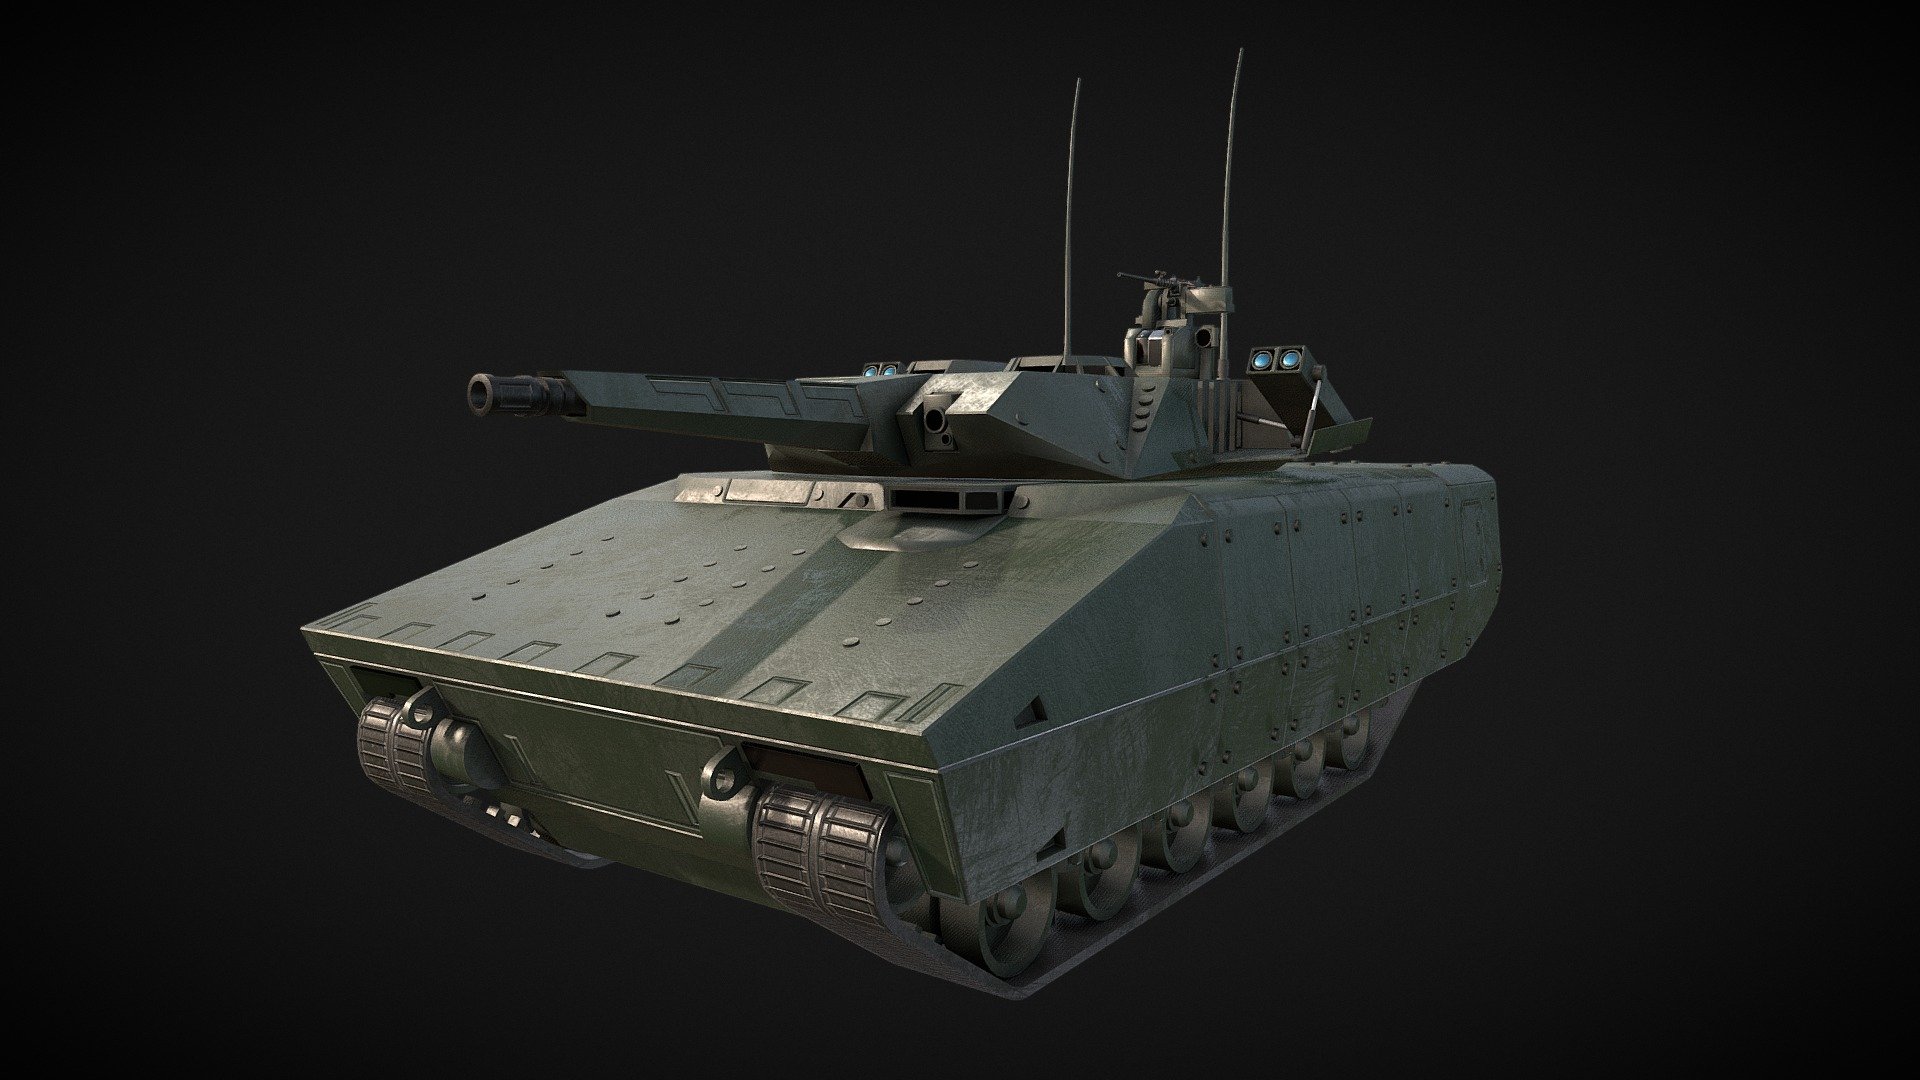 K41 Lynx IFV APC Tank- Armor Model/Texture work by Outworld Studios

Must give credit to Outworld Studios if using this asset

Show support by joining my discord: https://discord.gg/EgWSkp8Cxn - German Rheinmetall K41 Lynx IFV APC Tank - Buy Royalty Free 3D model by Outworld Studios (@outworldstudios) 3d model